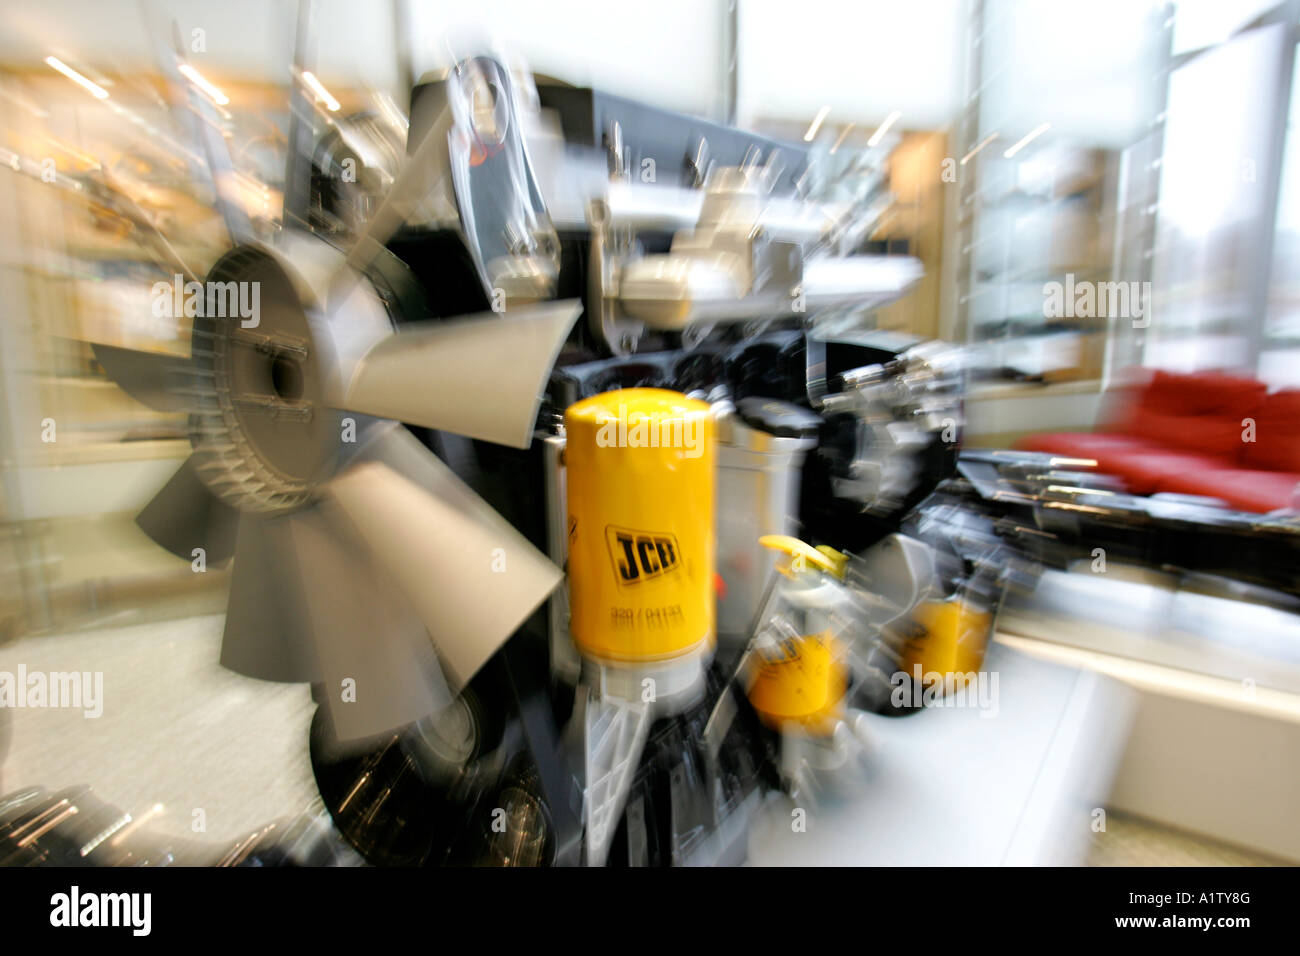 A diesel engine produced by the JCB engineering company based in Uttoxeter staffordshire uk producers construction equipment Stock Photo